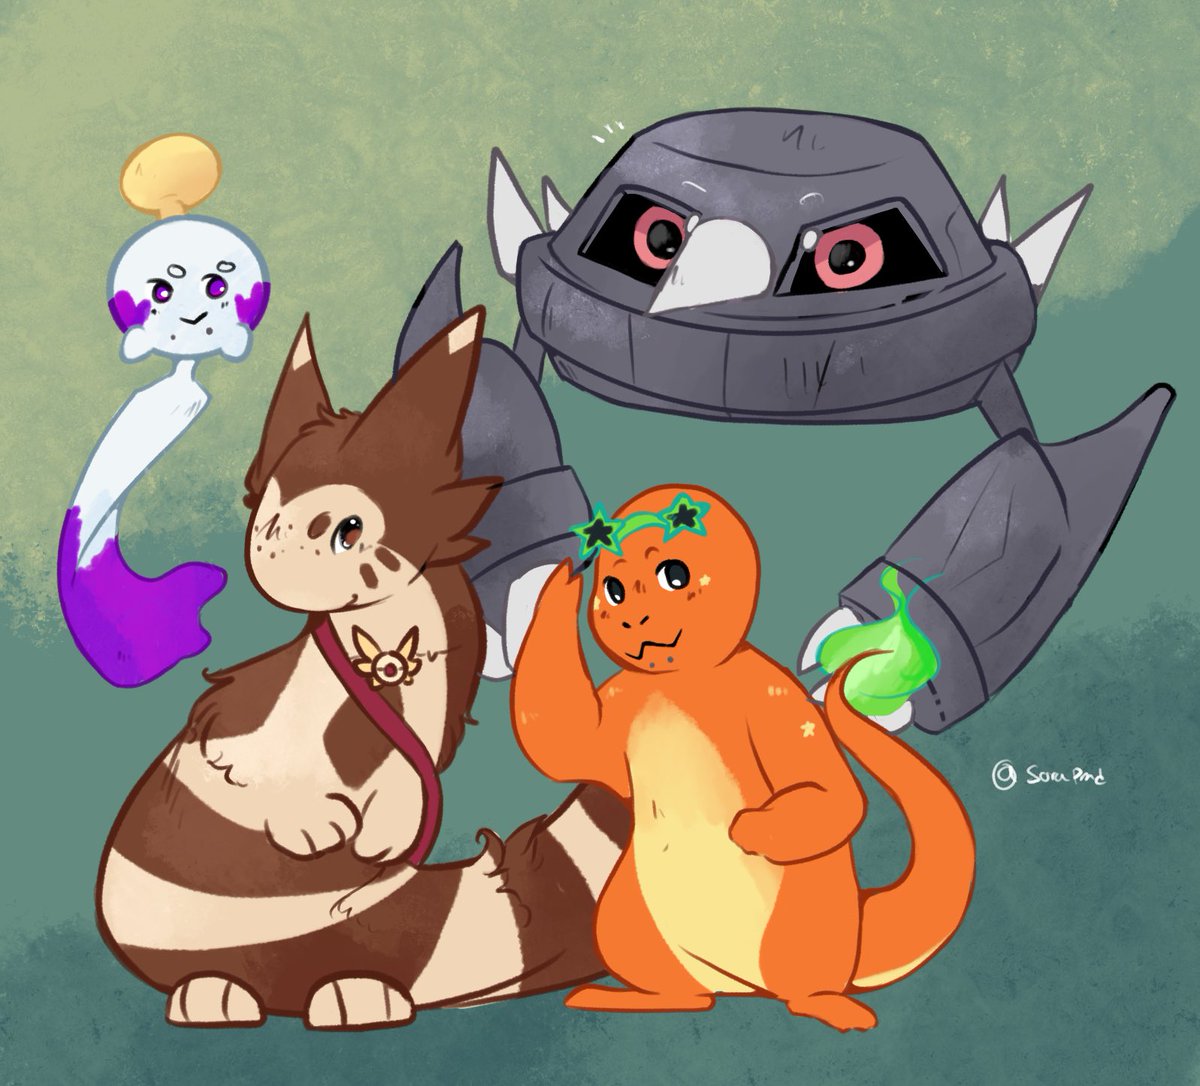 Watch out! This eclectic team is here to save the day!

#Pokemonmysterydungeon 
#furret #charmander